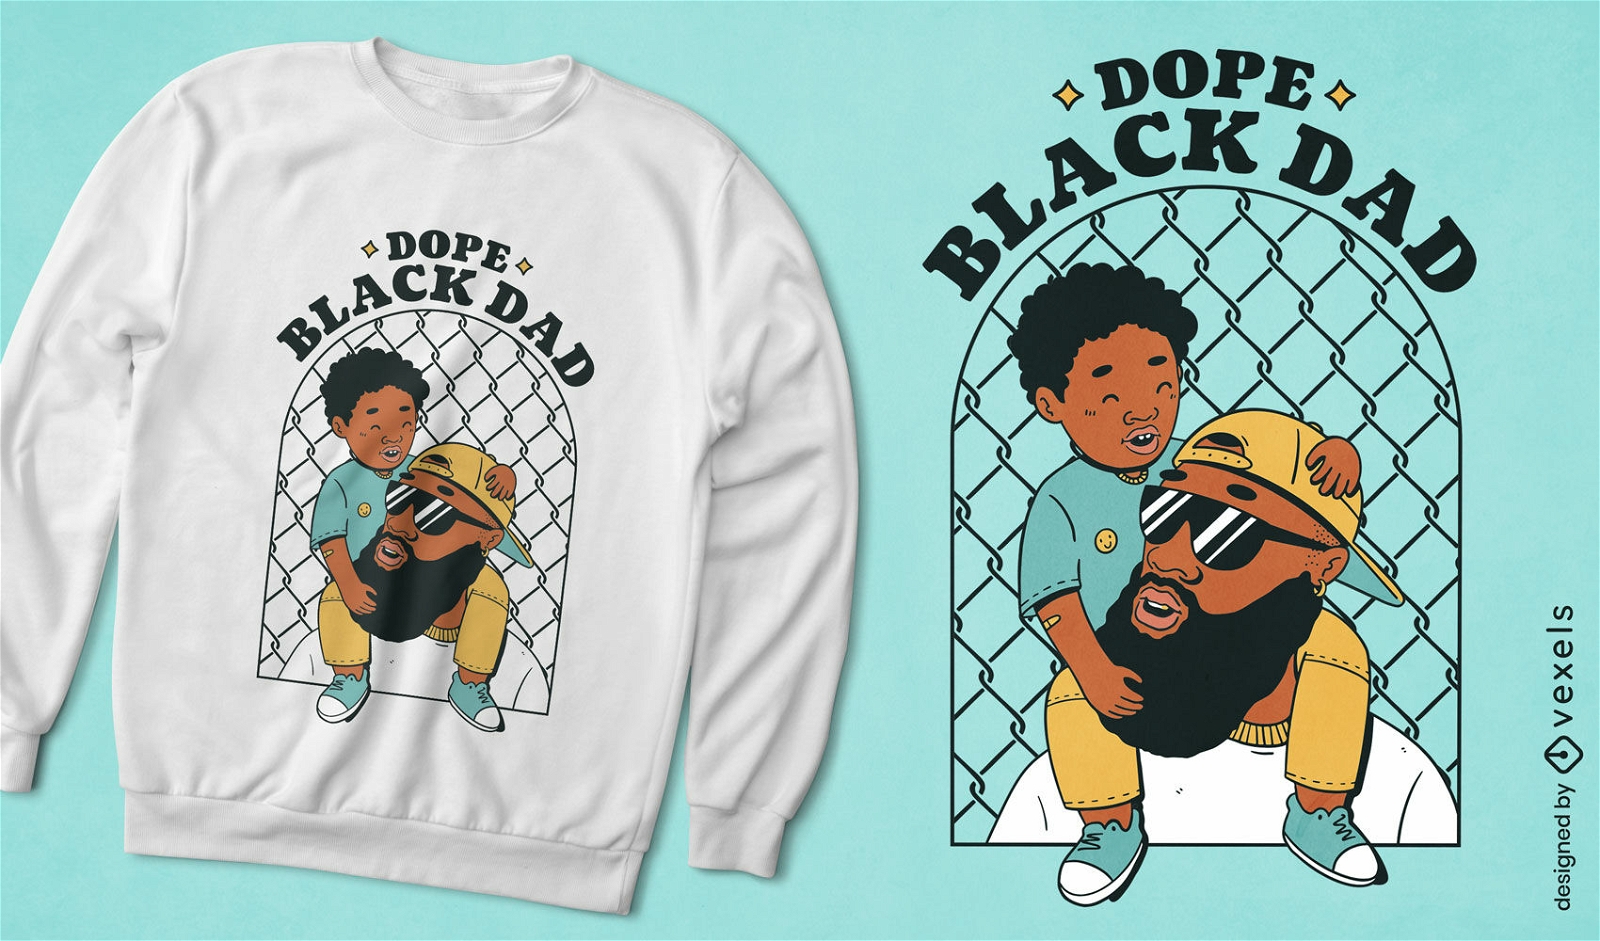 Black father and child t-shirt design